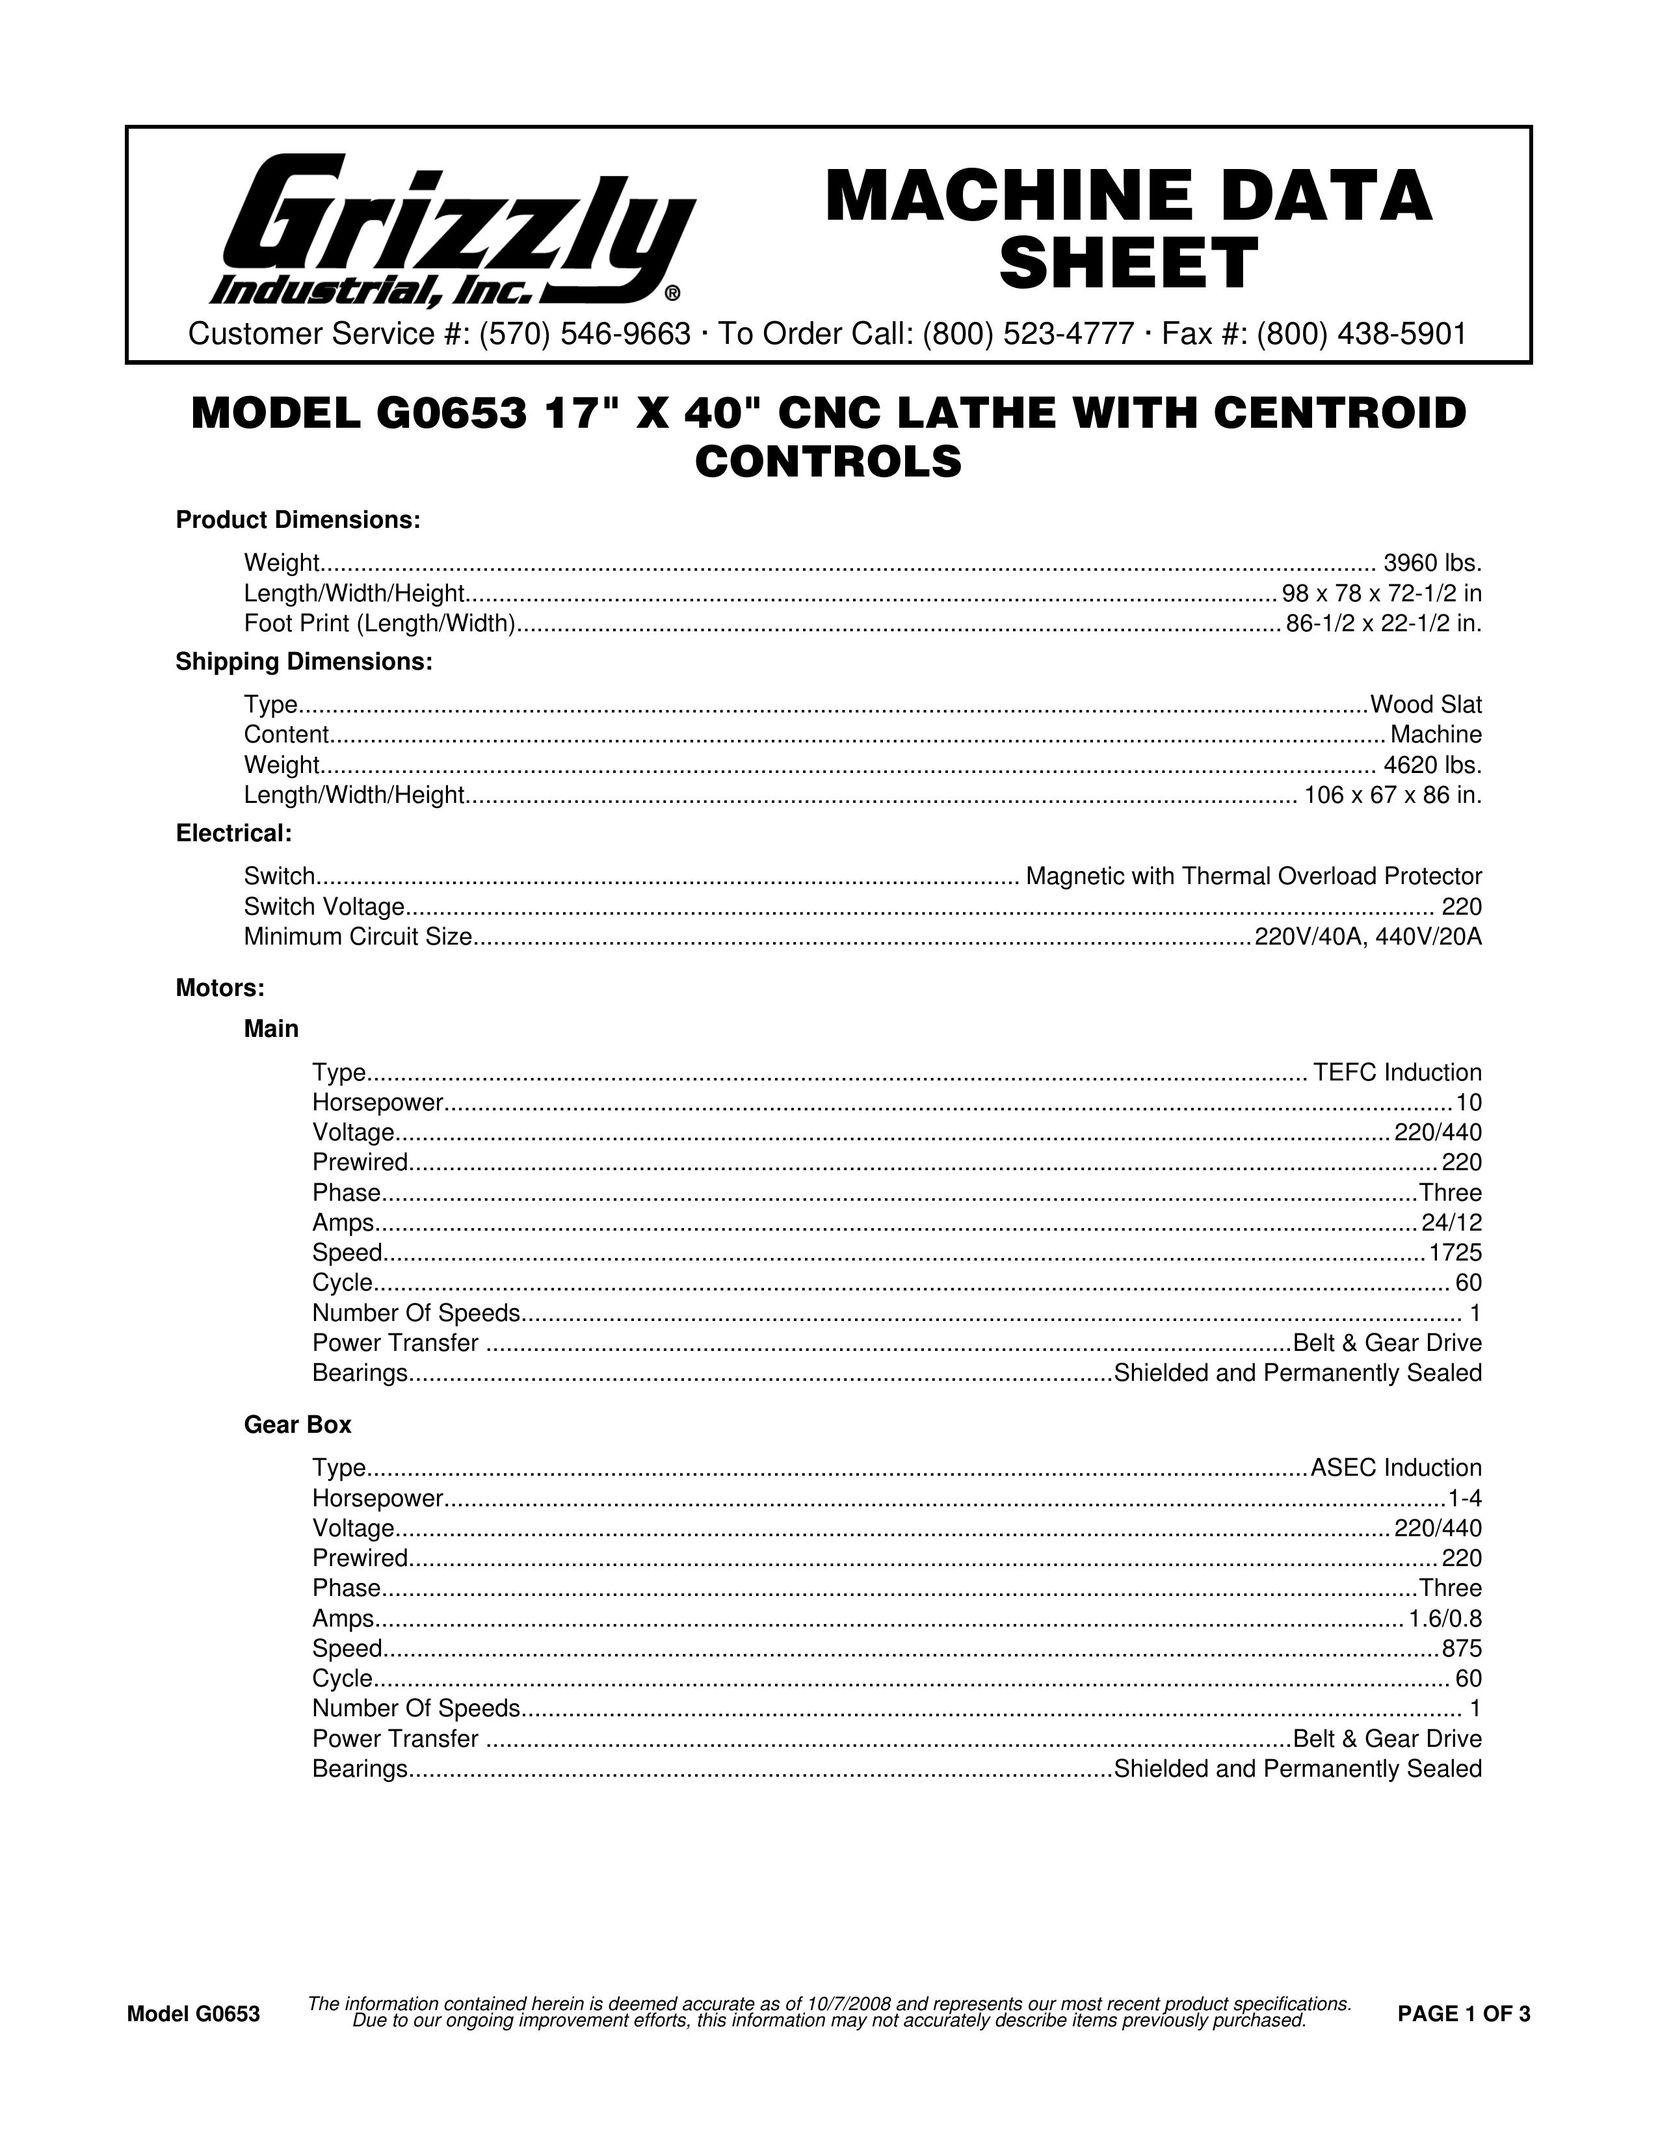 Grizzly G0653 Lathe User Manual